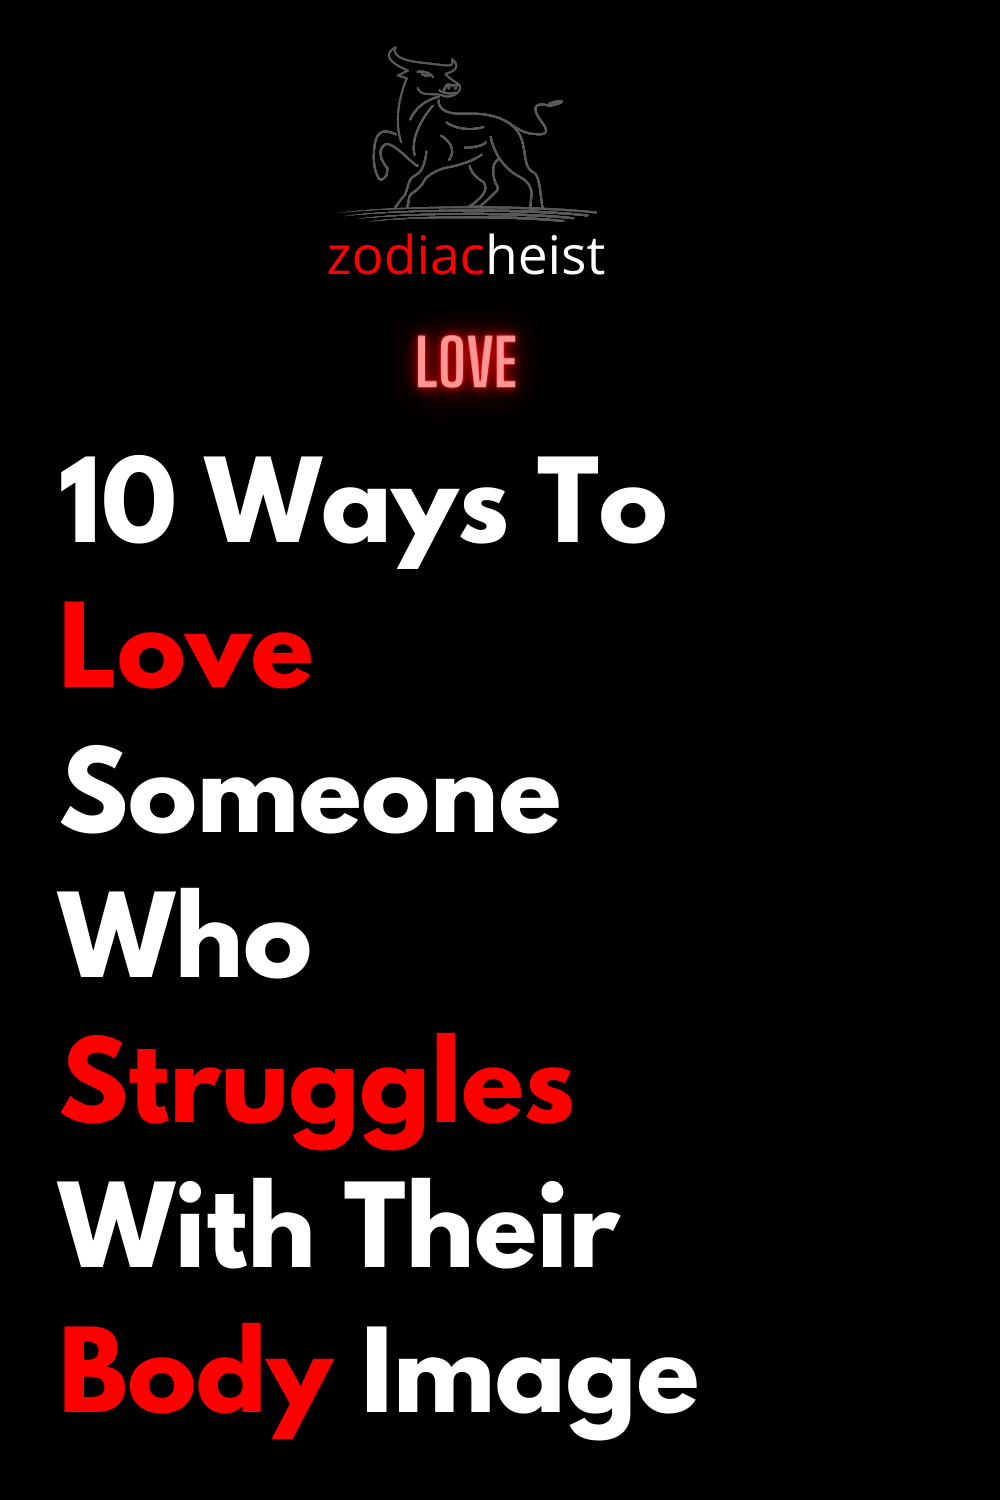 10 Ways To Love Someone Who Struggles With Their Body Image